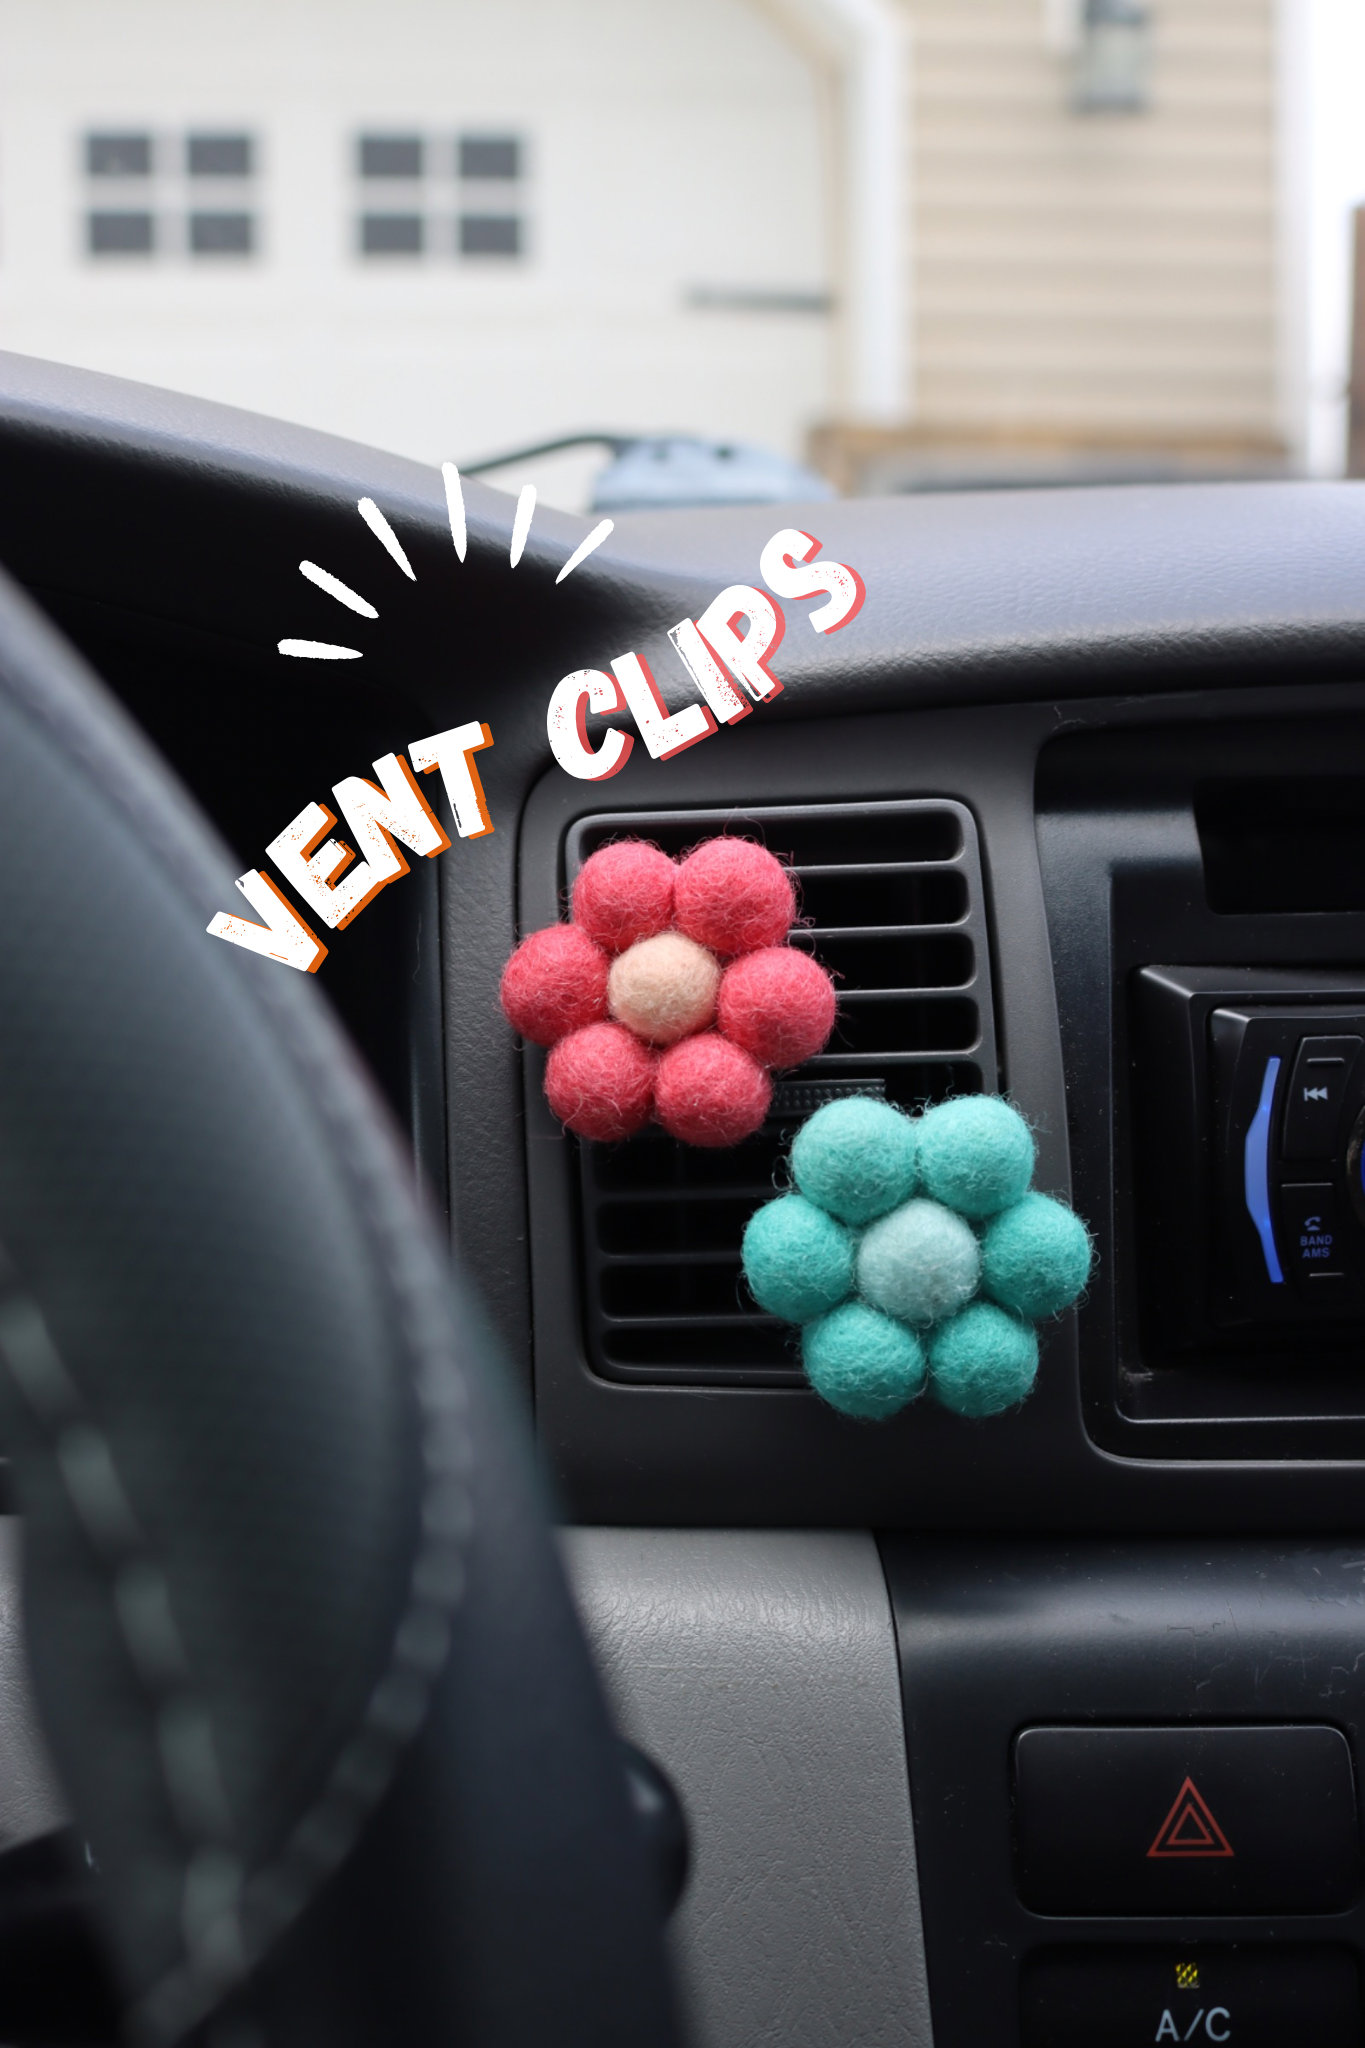  4PCS Car Diffuser Vent Clips, 30mm Essential Oil Car Diffuser  Aromatherapy Diffuser Car Vent Clips with 40 Felt Pads, Car Oil Diffusers  Gift Set for Women/Men, Christmas, Valentine's Day, Birthday 